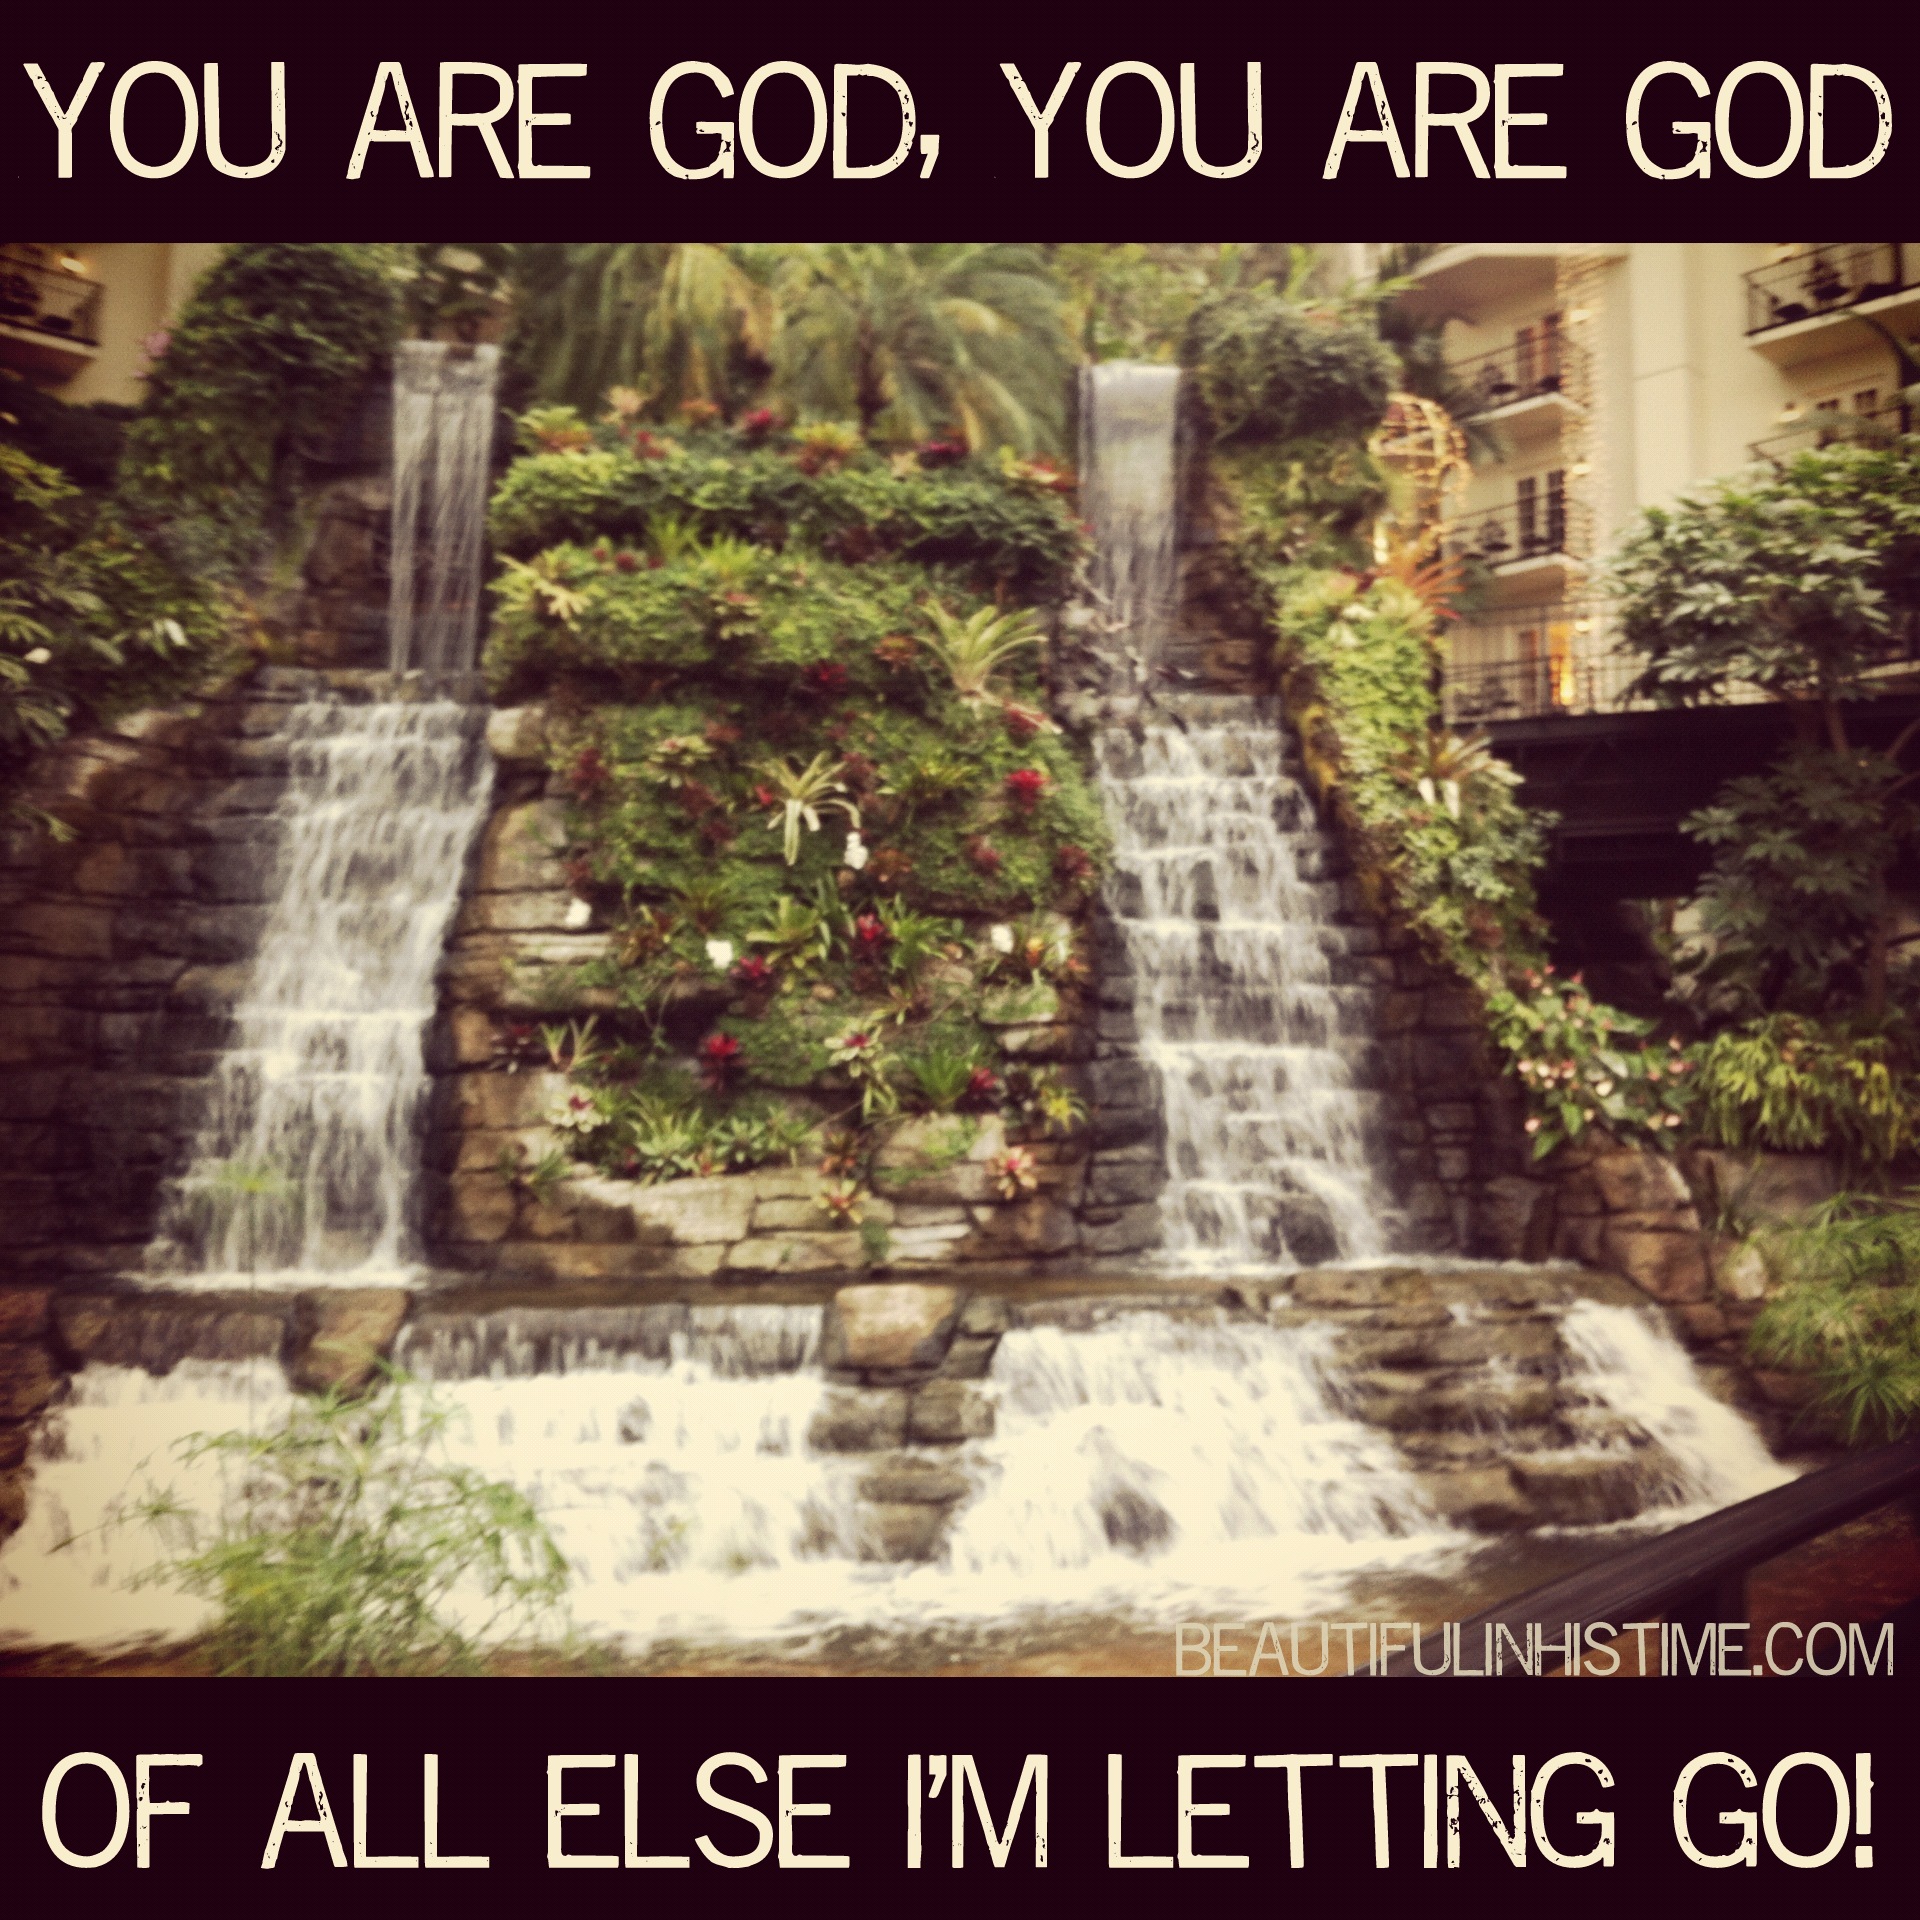 "You are God, You are God, Of all else I’m letting go!" {the wilderness between #legalism and #grace part 25 @beautifulinhistime.com}